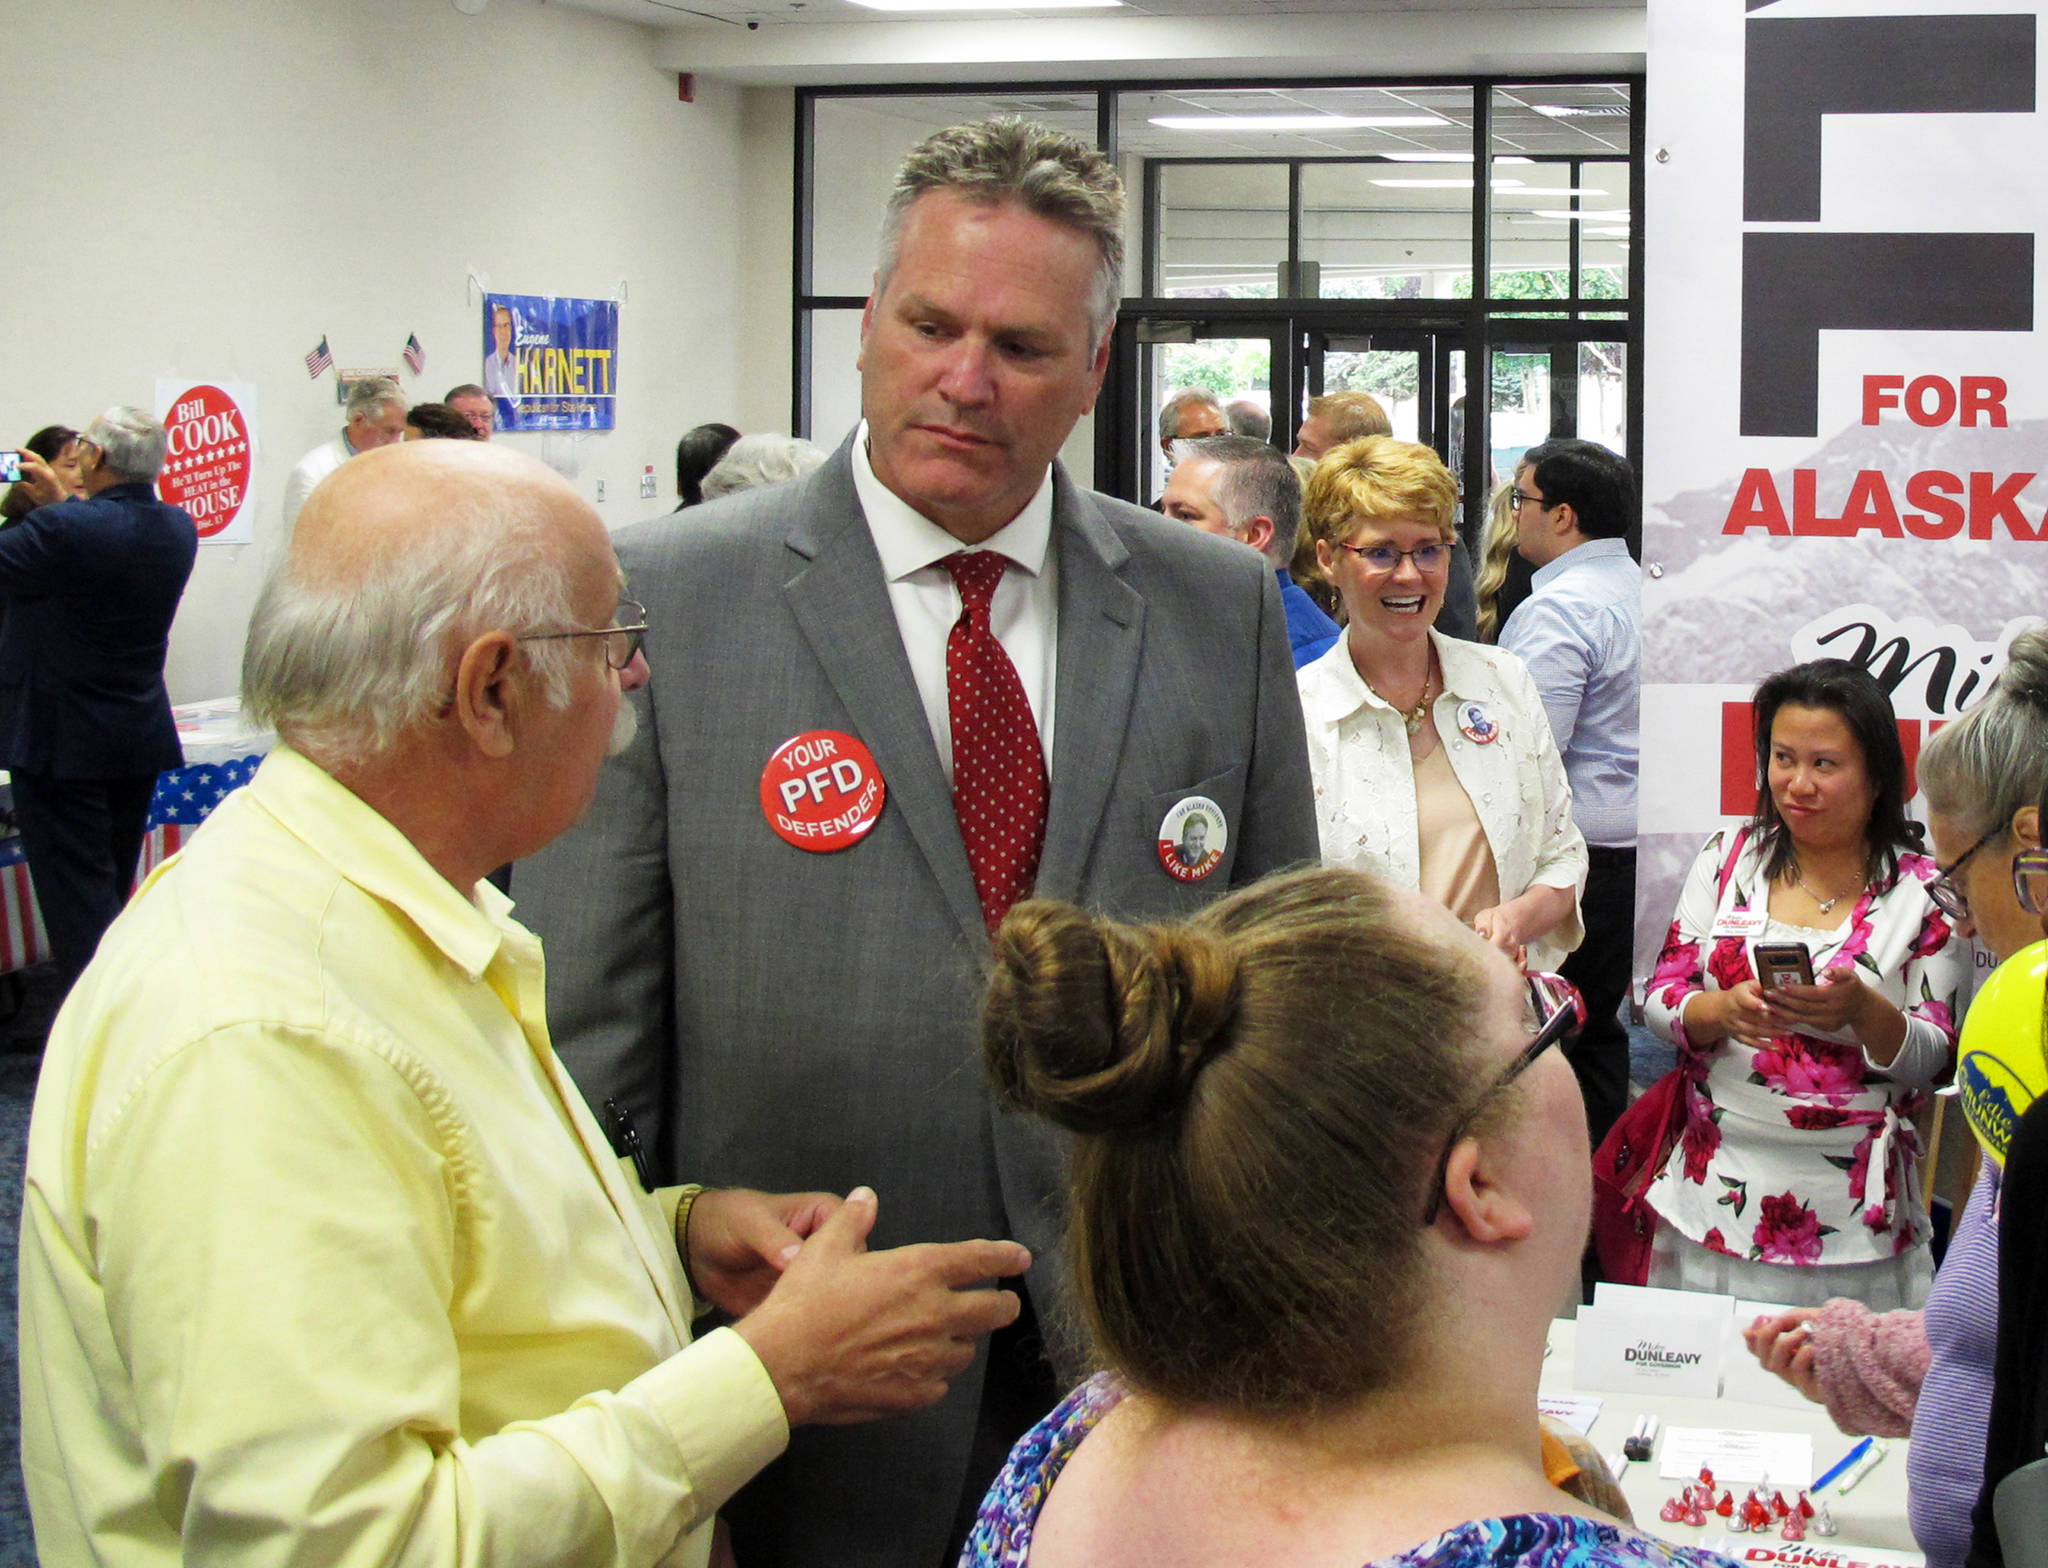 FILE - In this Aug. 19, 2018 file photo, Republican gubernatorial candidate Mike Dunleavy, second from left, stands near his campaign table at a meet-and-greet event in the lobby of Anchorage Baptist Temple in Anchorage, Alaska. As a kid growing up on the East Coast, Mike Dunleavy dreamed of coming to Alaska, of hunting caribou, fishing in wild streams and losing himself in the state’s vast, open spaces. Now, after nearly 35 years in his adopted state, the conservative Republican is vying to become Alaska’s next governor. (AP Photo/Becky Bohrer, File)                                In this Aug. 19 file photo, Republican gubernatorial candidate Mike Dunleavy, second from left, stands near his campaign table at a meet-and-greet event in the lobby of Anchorage Baptist Temple in Anchorage. (Becky Bohrer | The Associated Press File)